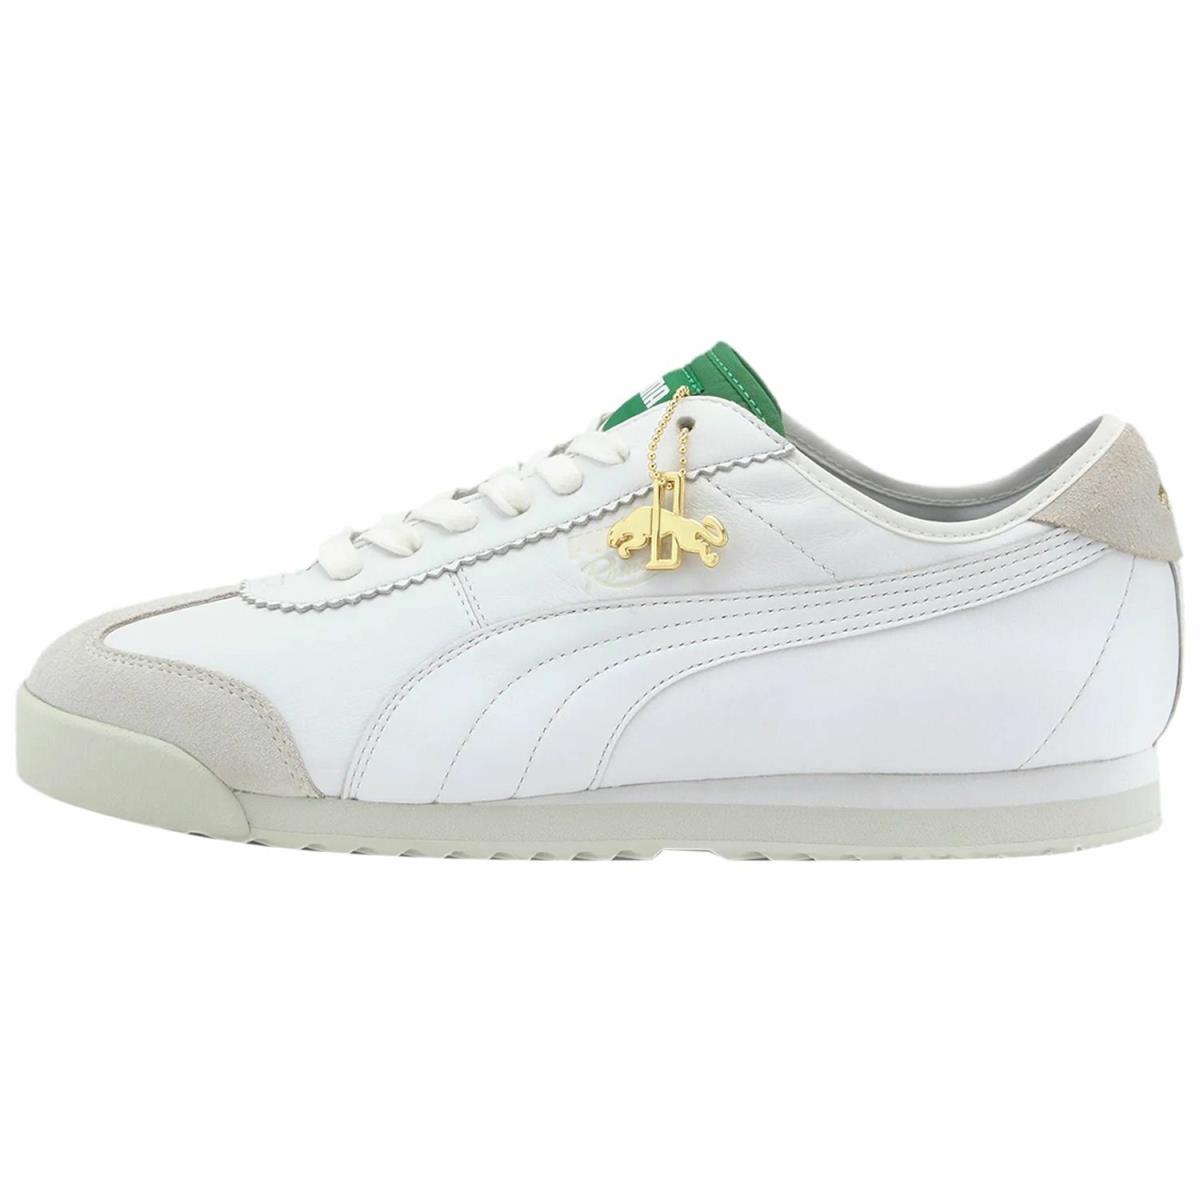 Puma Roma `68 Dassler Legacy Collection Mens 374881-01 White Shoes Size 11